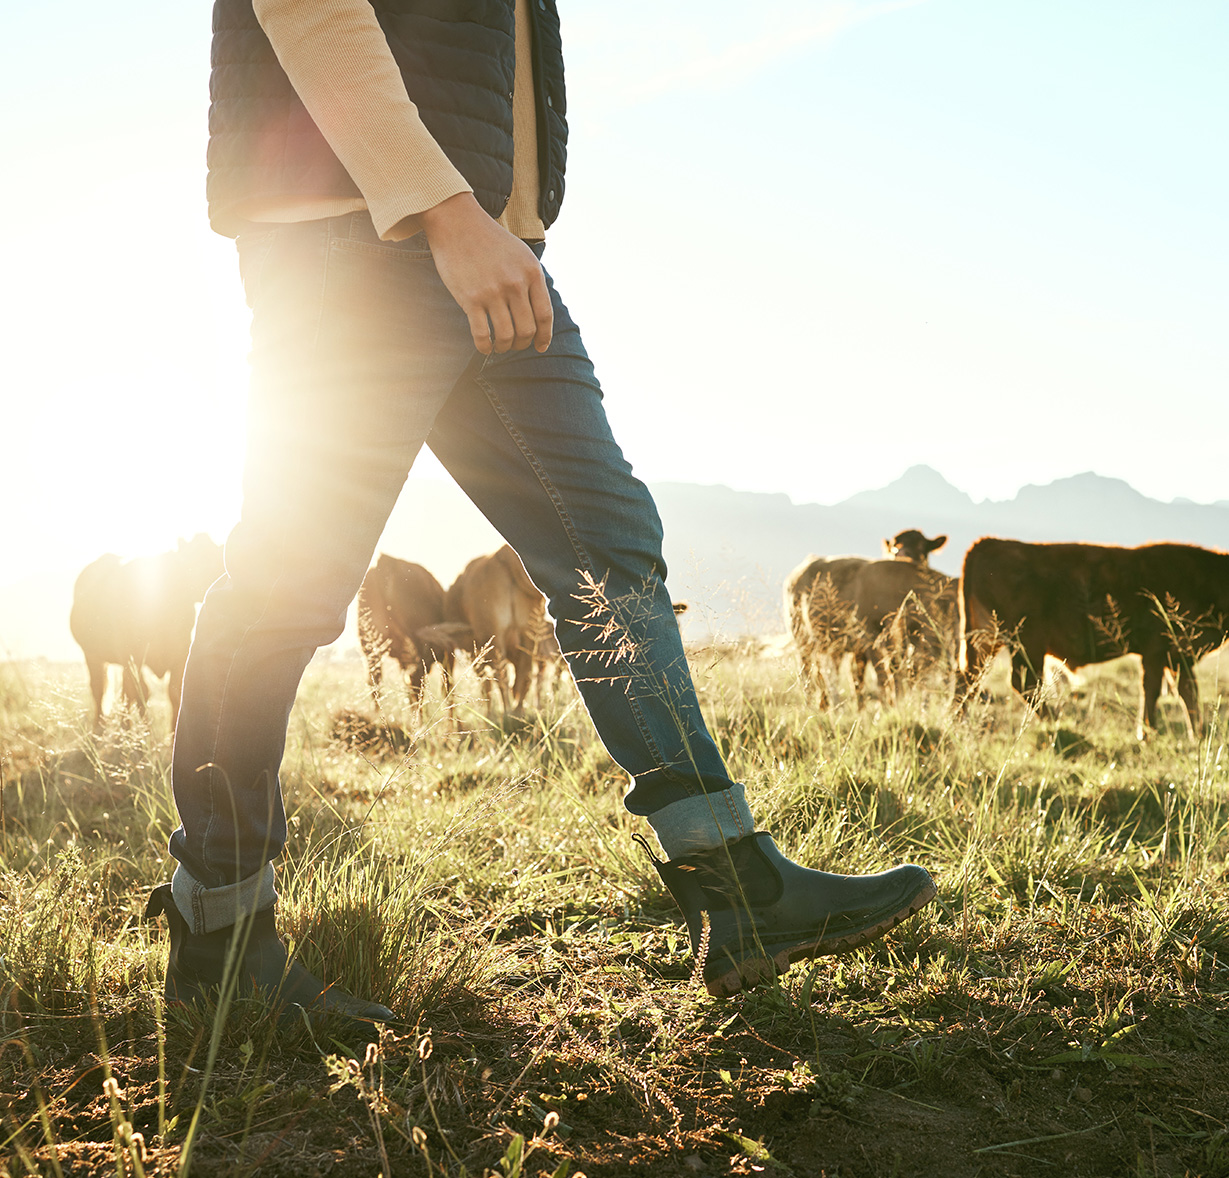 Image of man's legs walking in a field with cows in backdrop, serene atmosphere